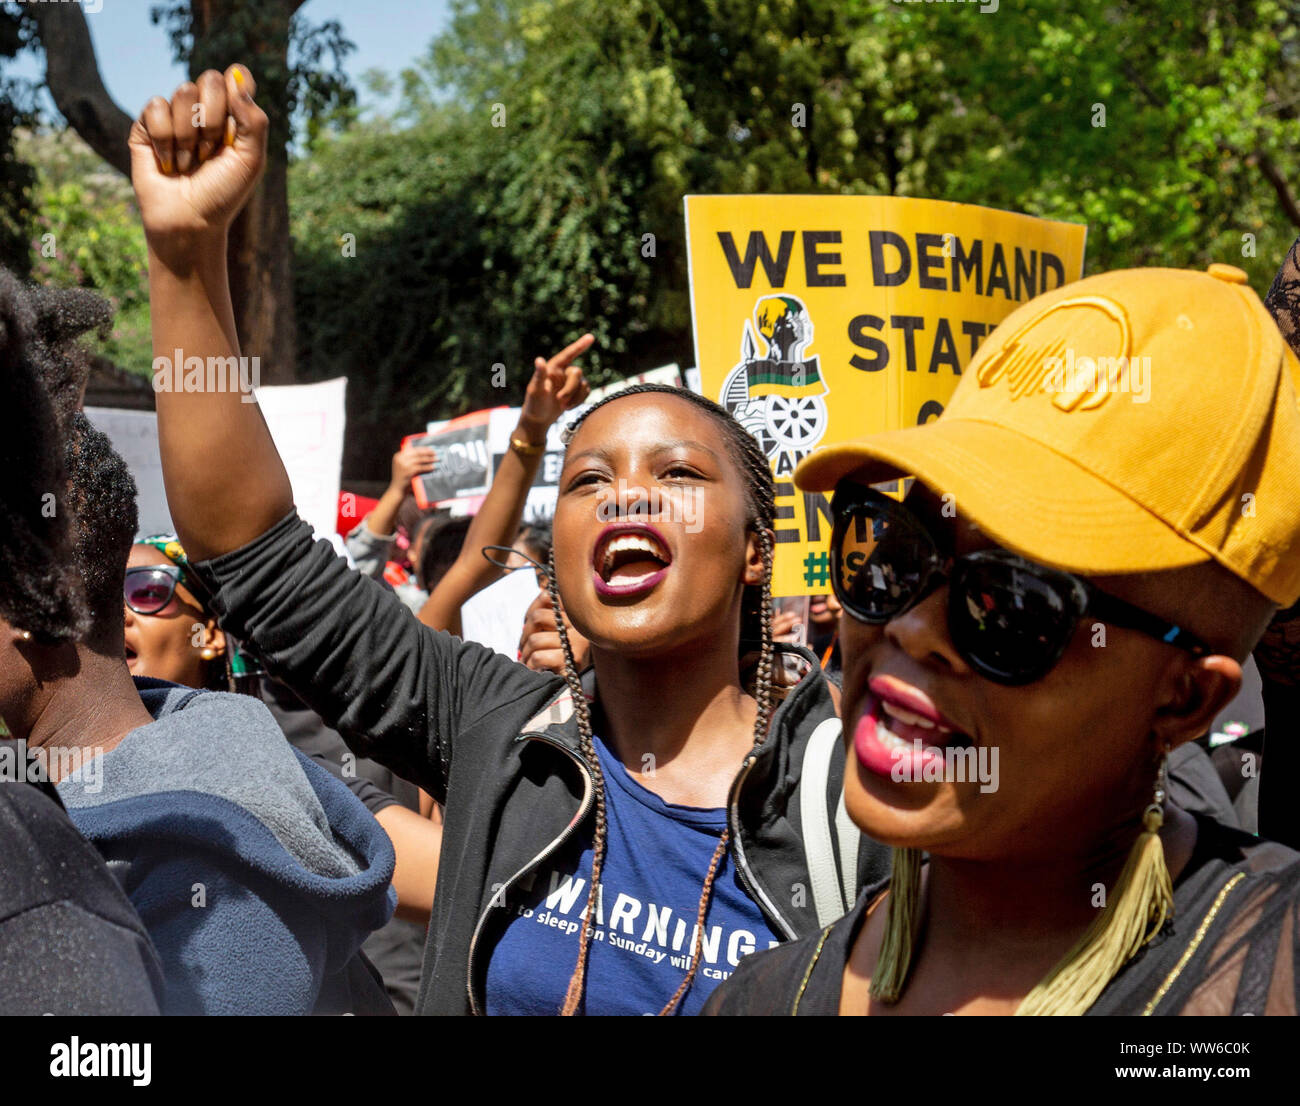 Johannesburg, South Africa. 13th Sep, 2019. People take part in a protest against gender violence in Johannesburg, South Africa, Sept. 13, 2019. Thousands of people hit the main streets in Sandton, Johannesburg to protest gender violence on Friday. Civil society groups assembled from 3 a.m outside the Johannesburg Stock Exchange (JSE) where they staged Femicide scene. The mock crime scene represented what women have to go through because of gender-based violence. Credit: Yeshiel Panchia/Xinhua Stock Photo